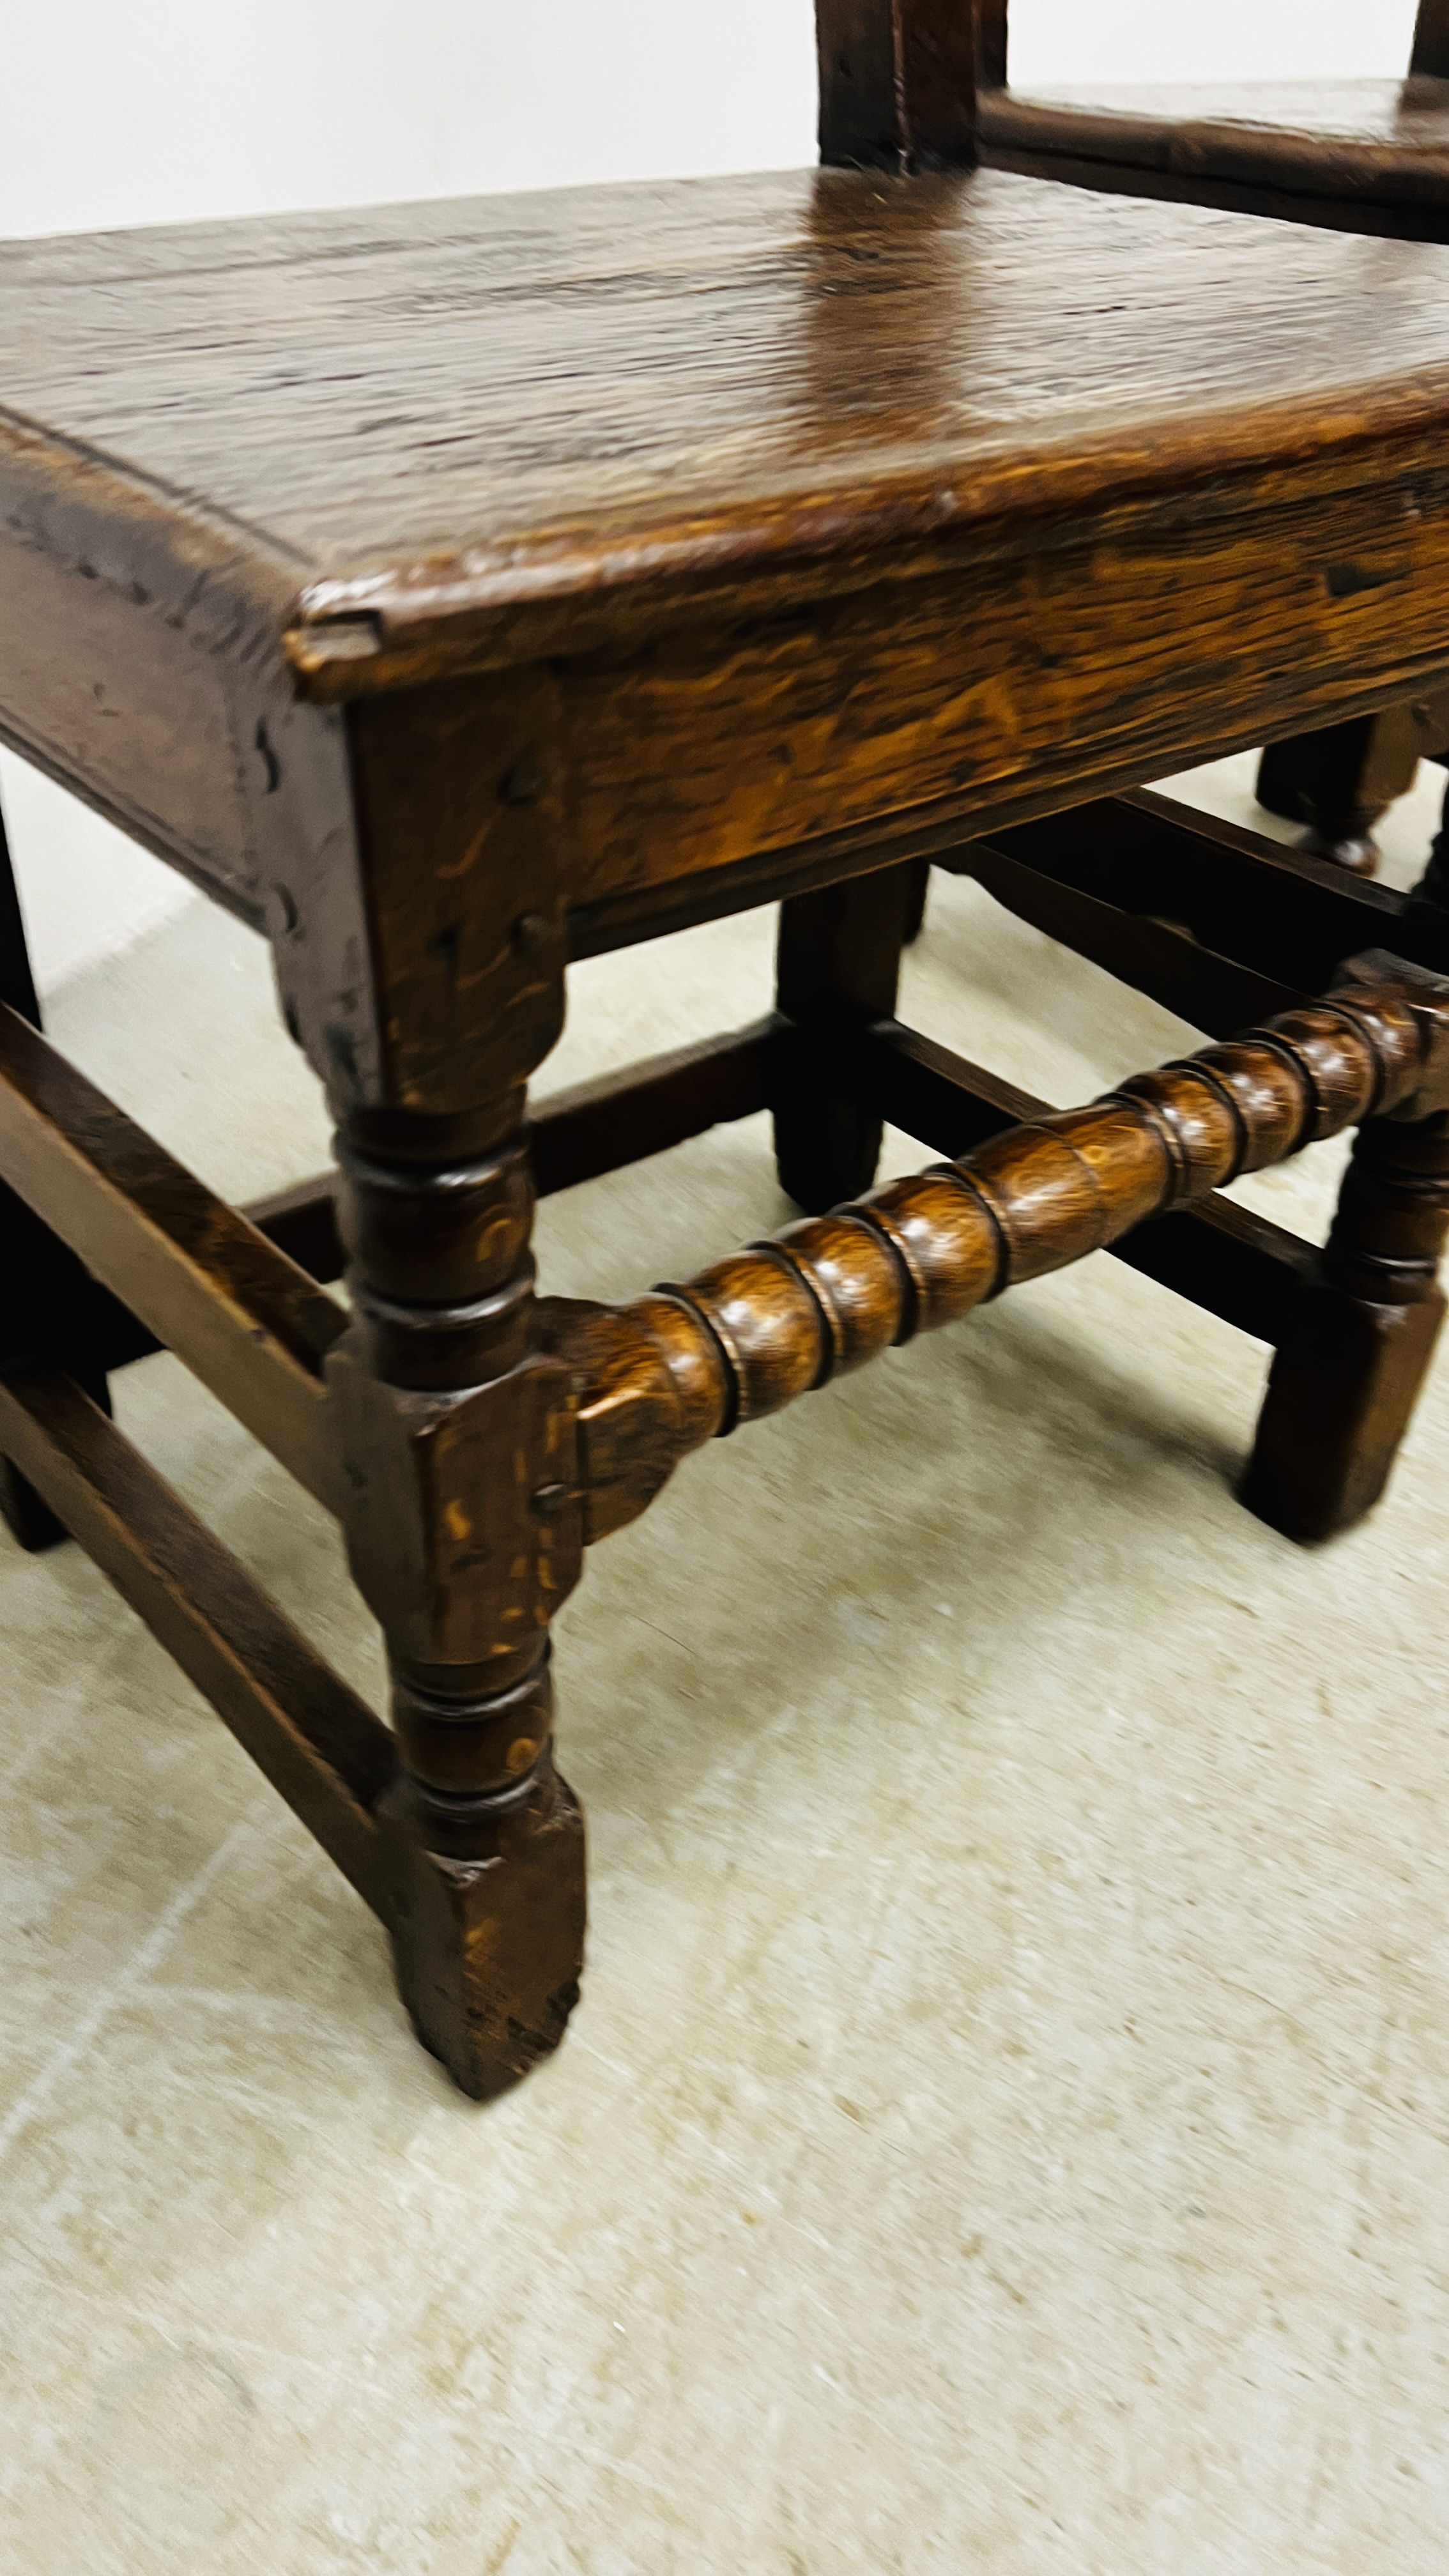 A PAIR OF 17TH CENTURY JOINED OAK CHAIRS, POSSIBLY NORTH COUNTRY. - Image 6 of 20